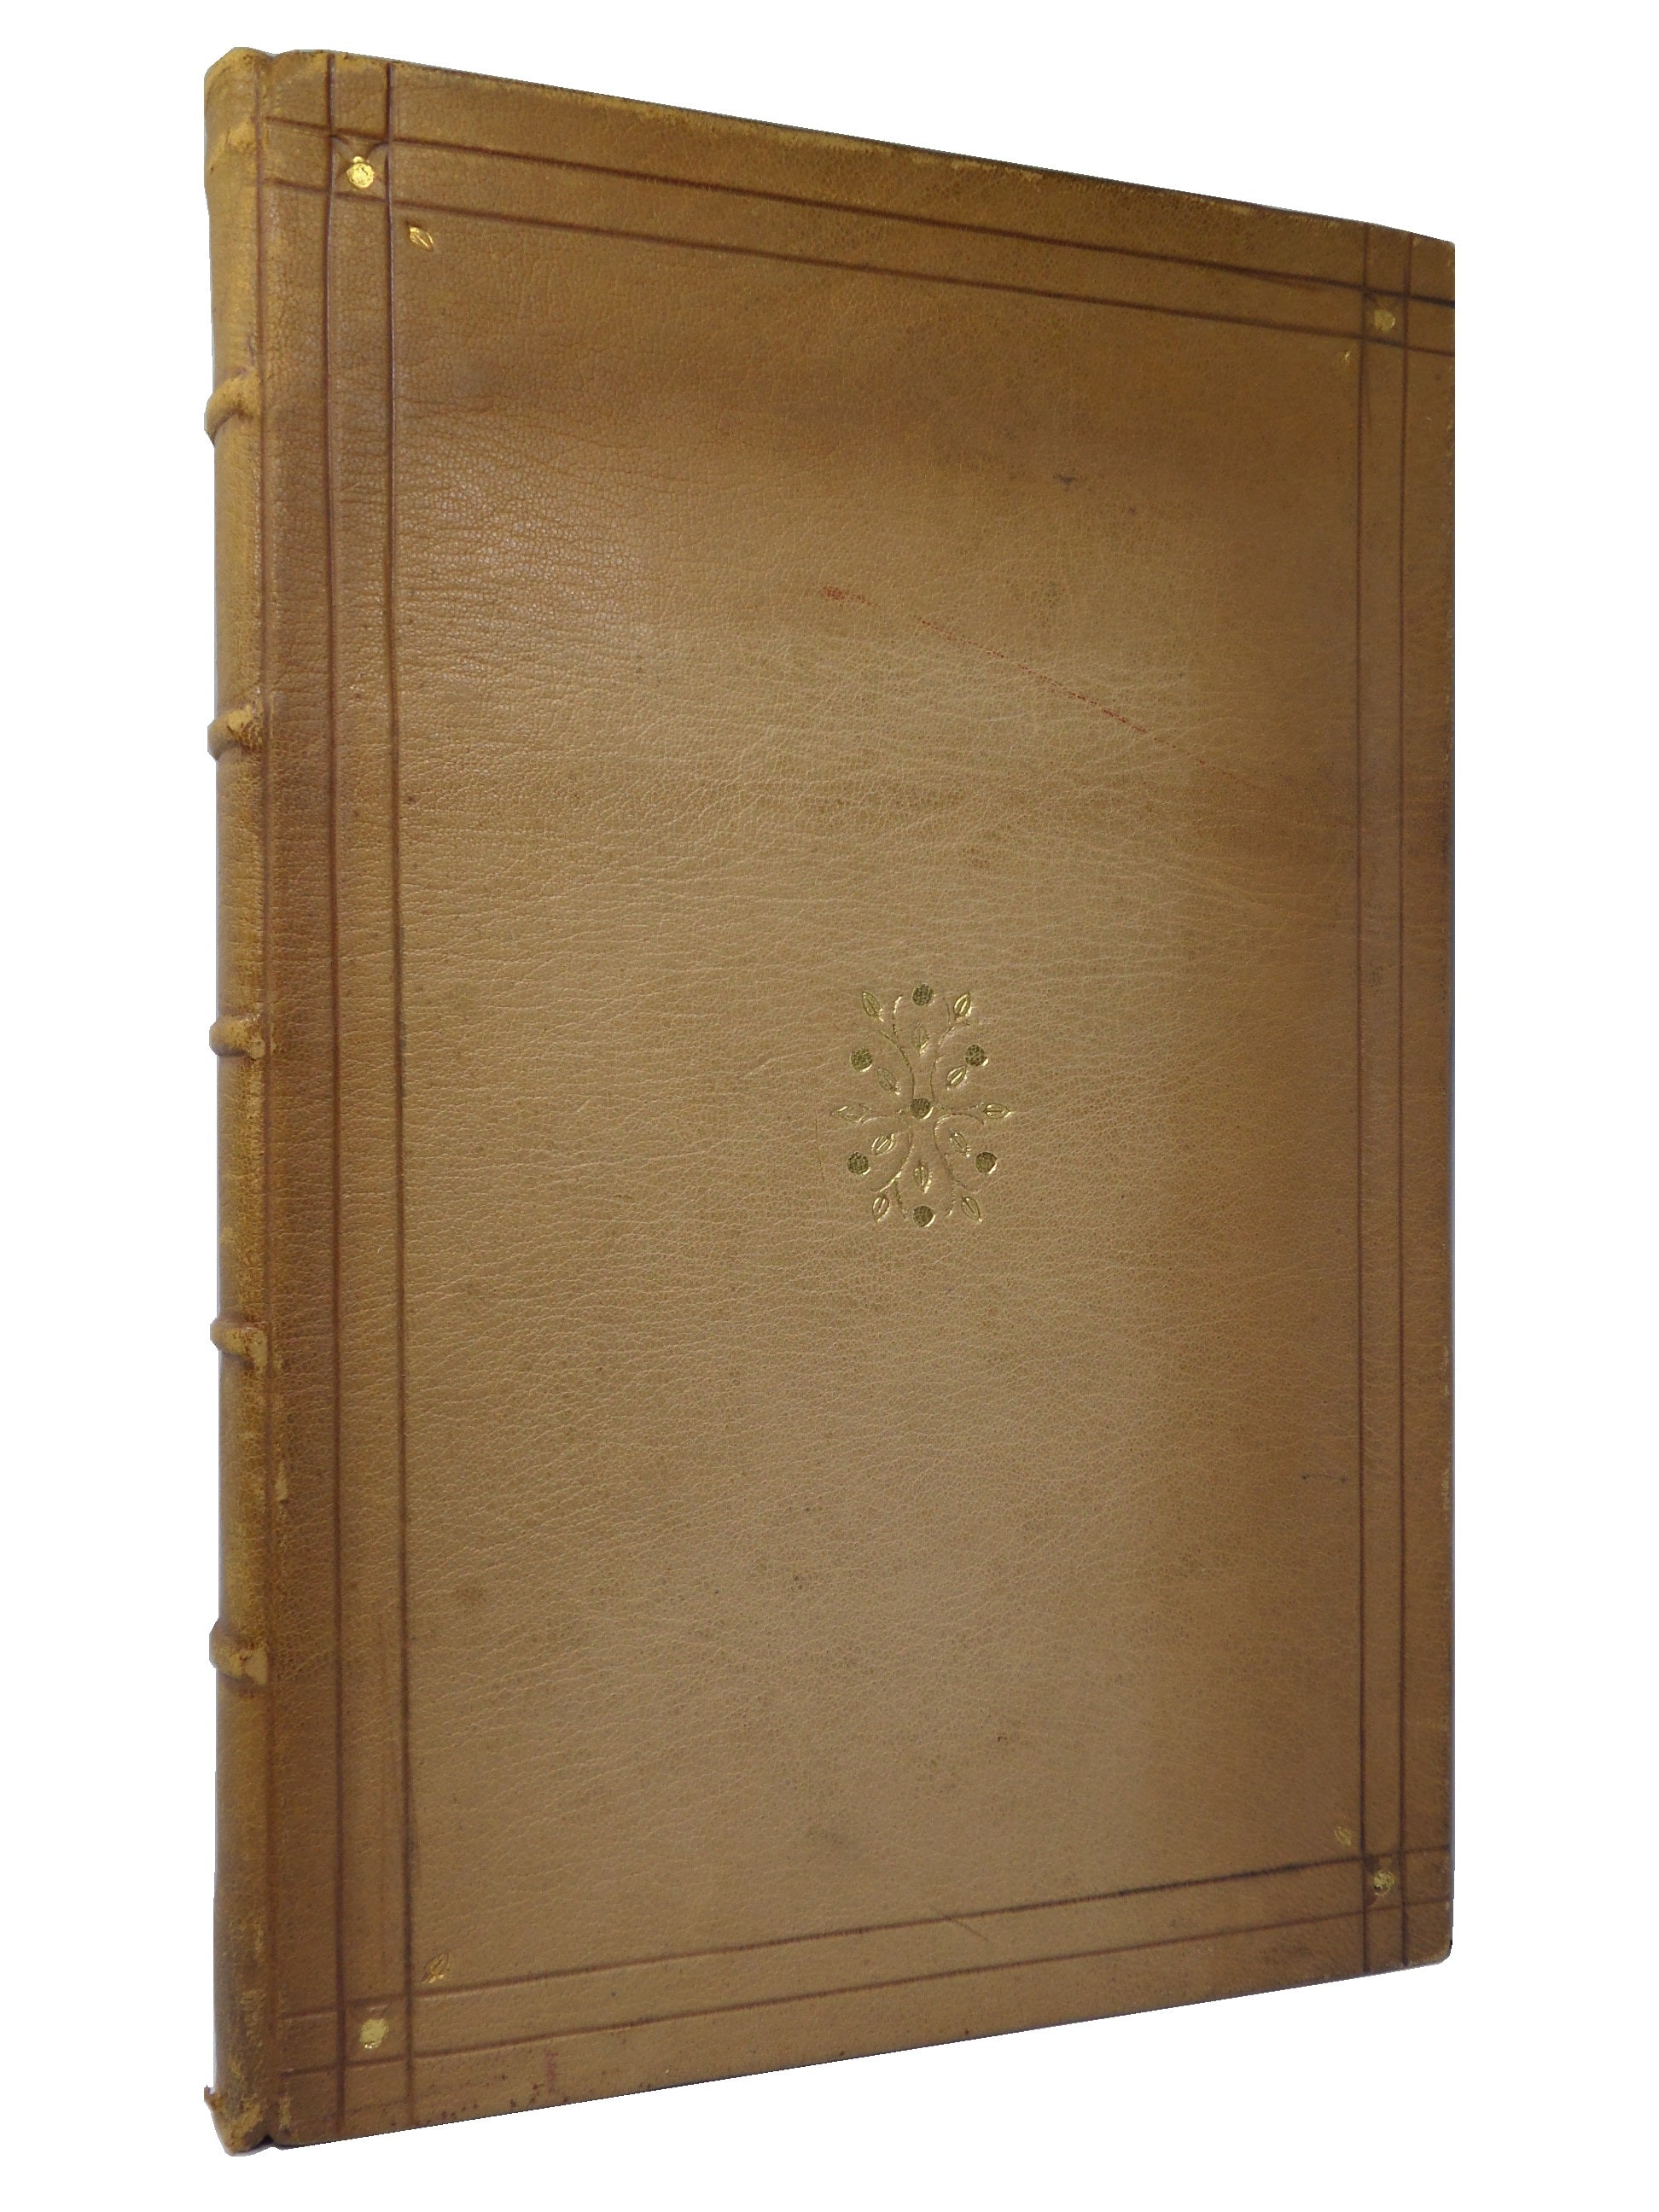 INSTRUCTIONS FOR PARISH PRIESTS BY JOHN MYRC 1902 LEATHER-BOUND